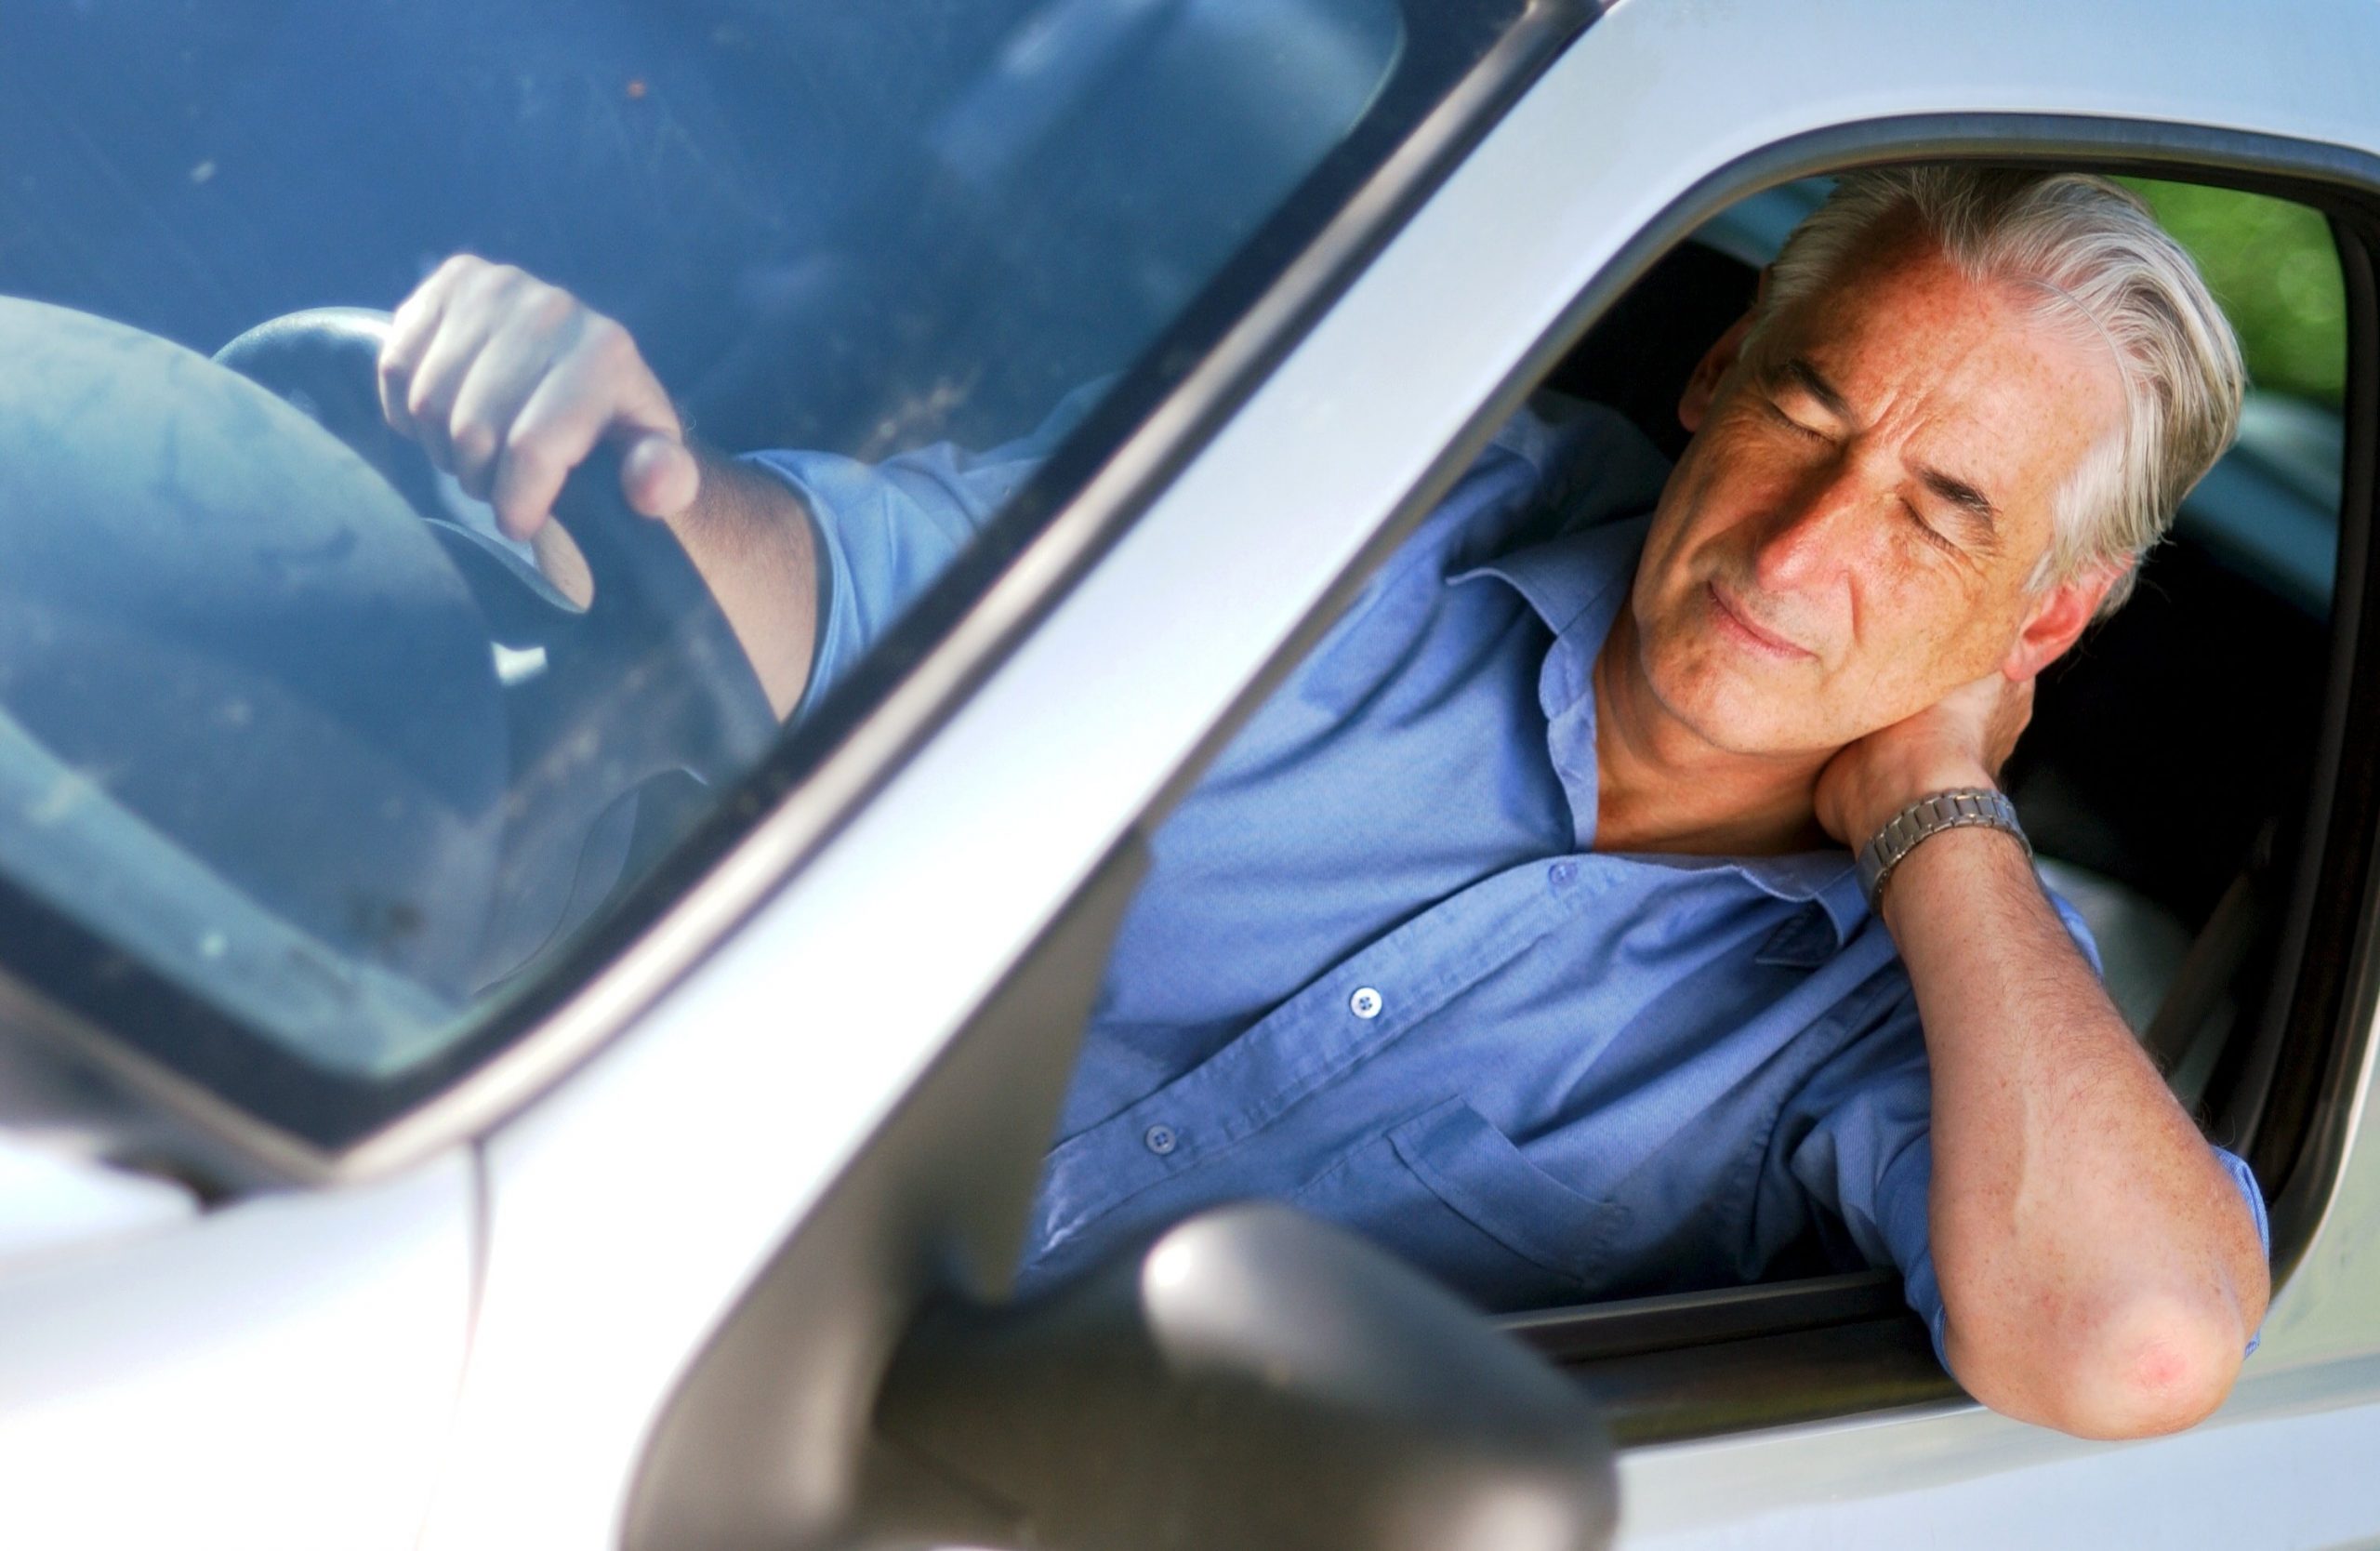 Elderly motorists in Spain will have to renew driving licences more frequently